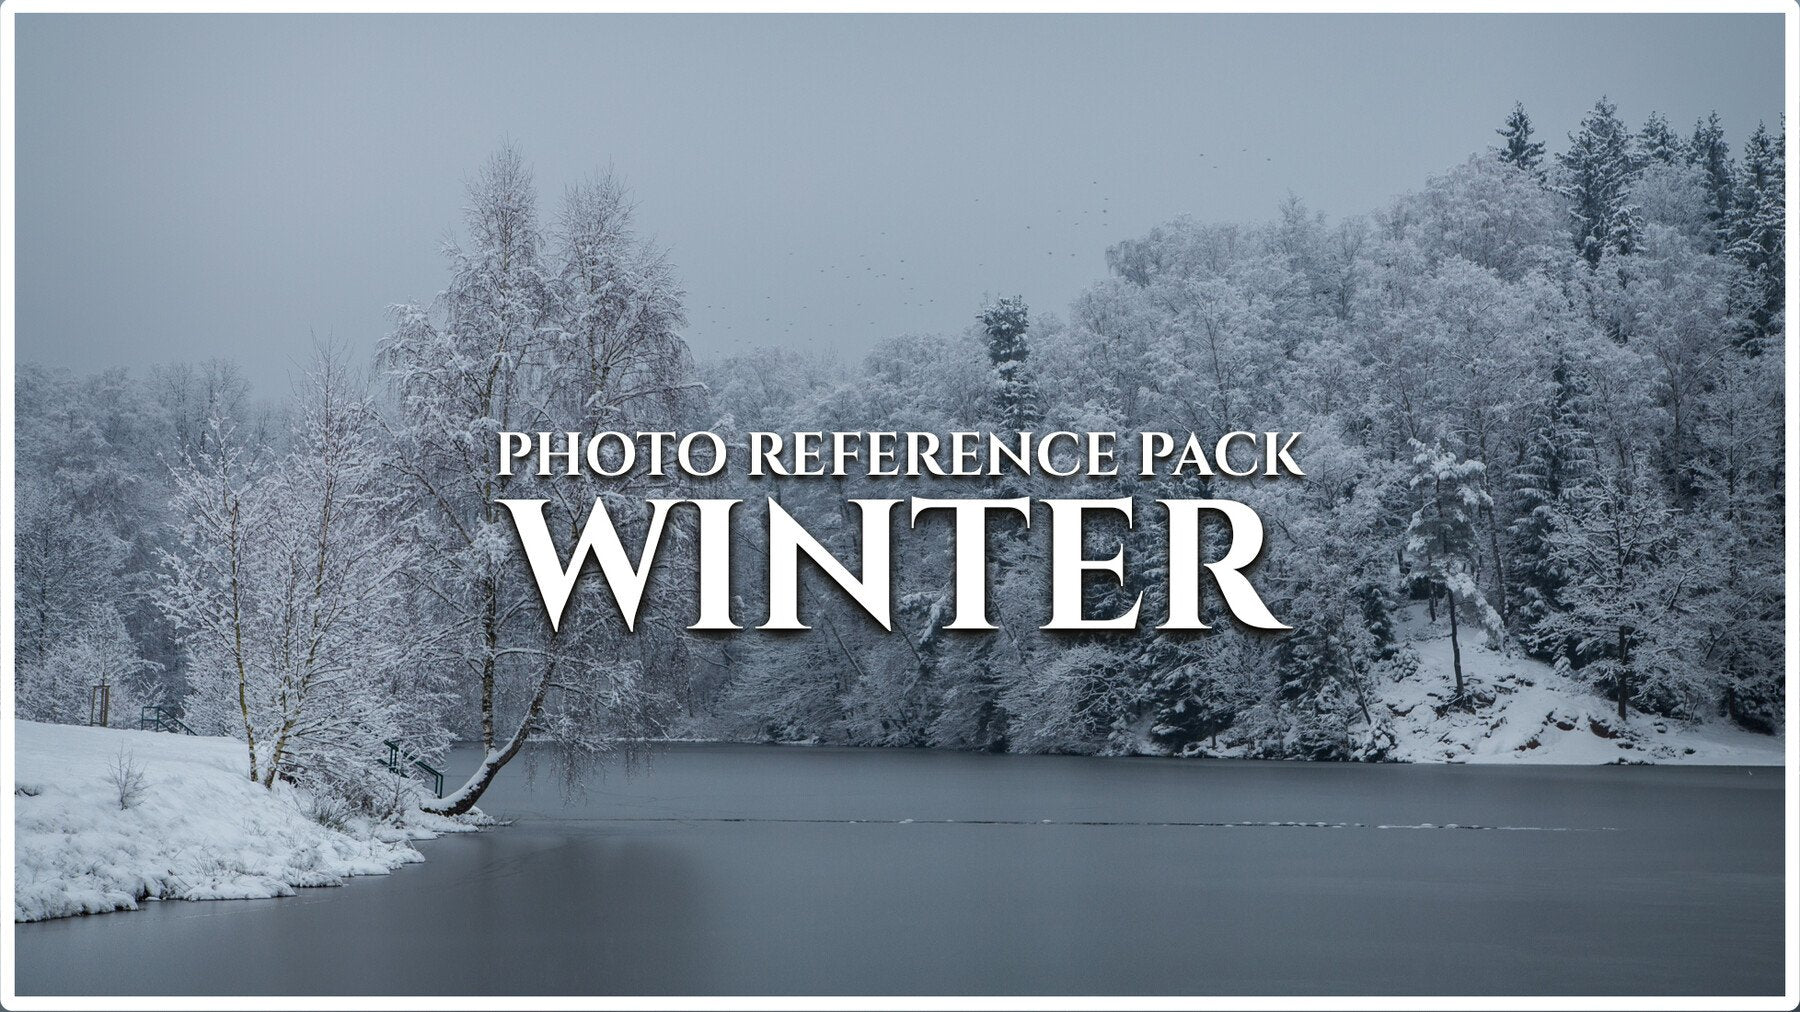 Winter-Photo Reference Pack For Artists 511 JPEGs